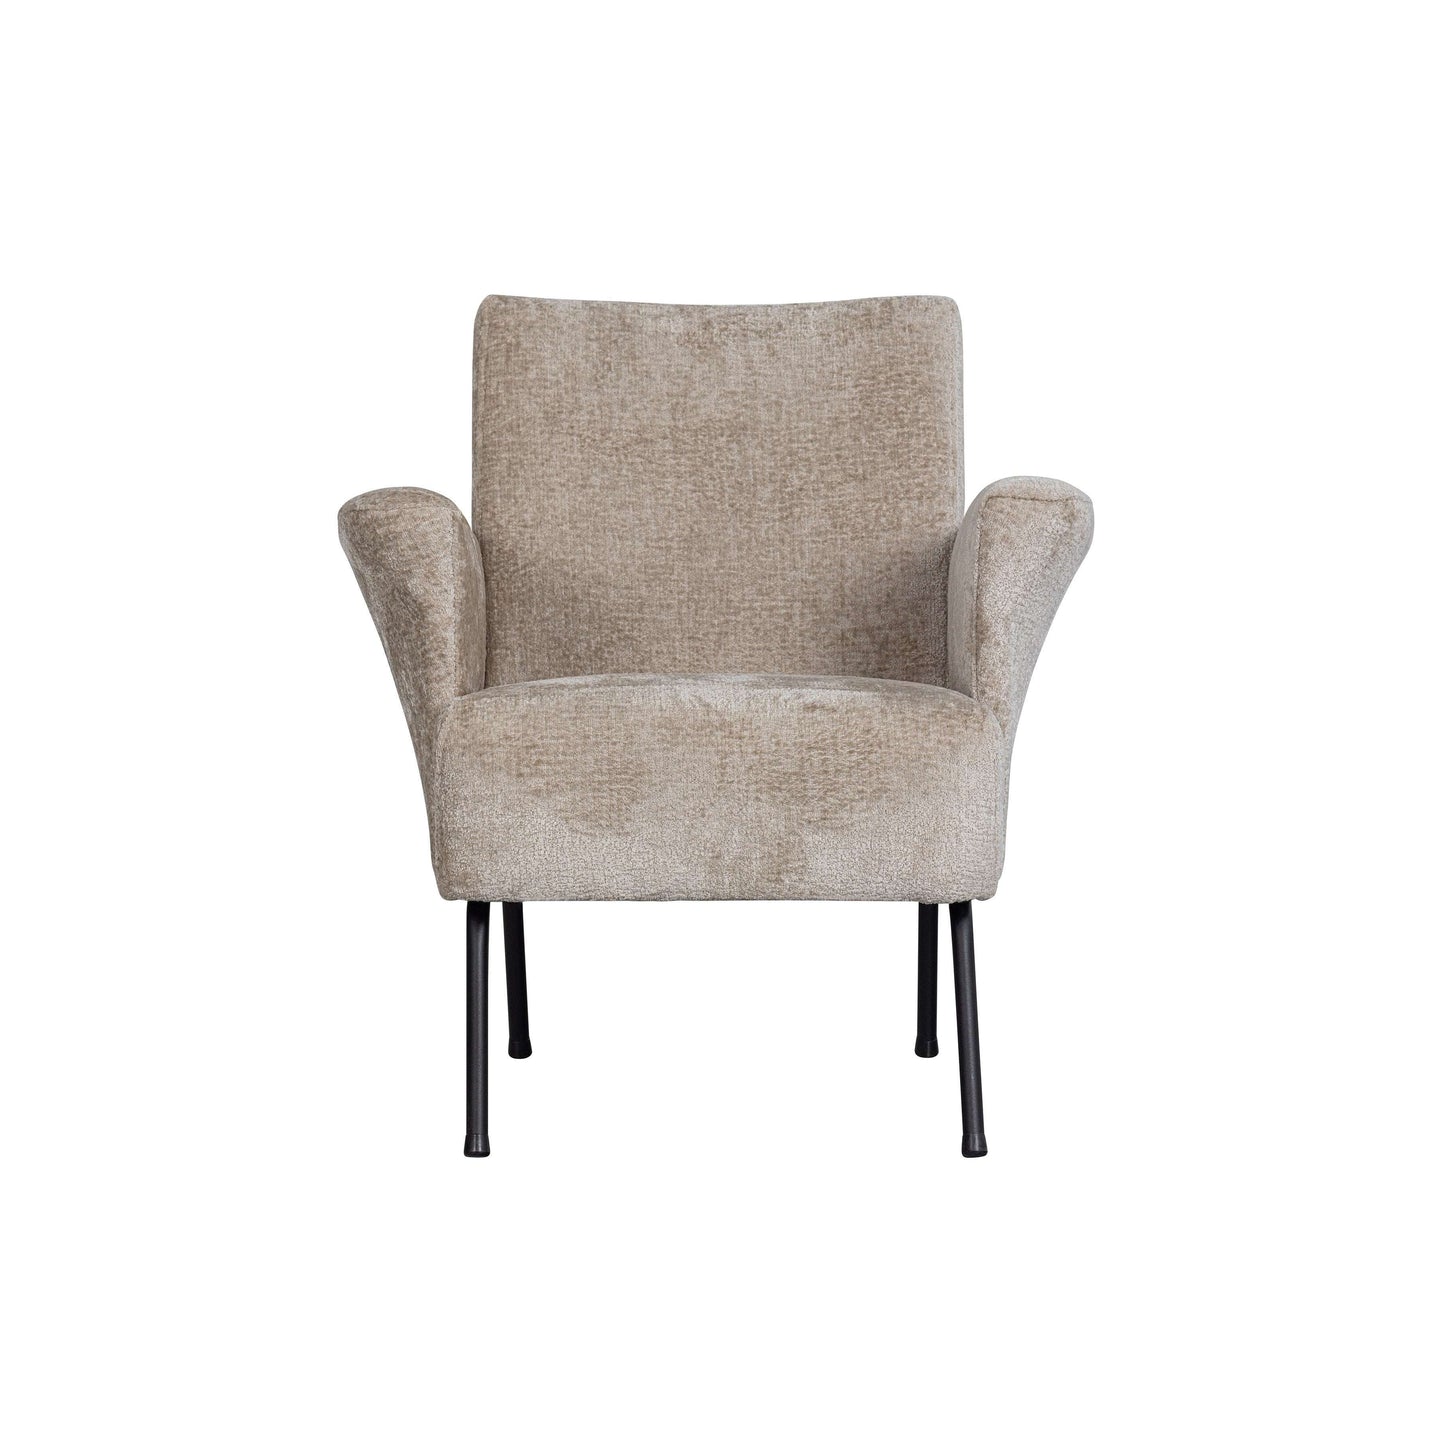 BePureHome Muse fauteuil  naturel